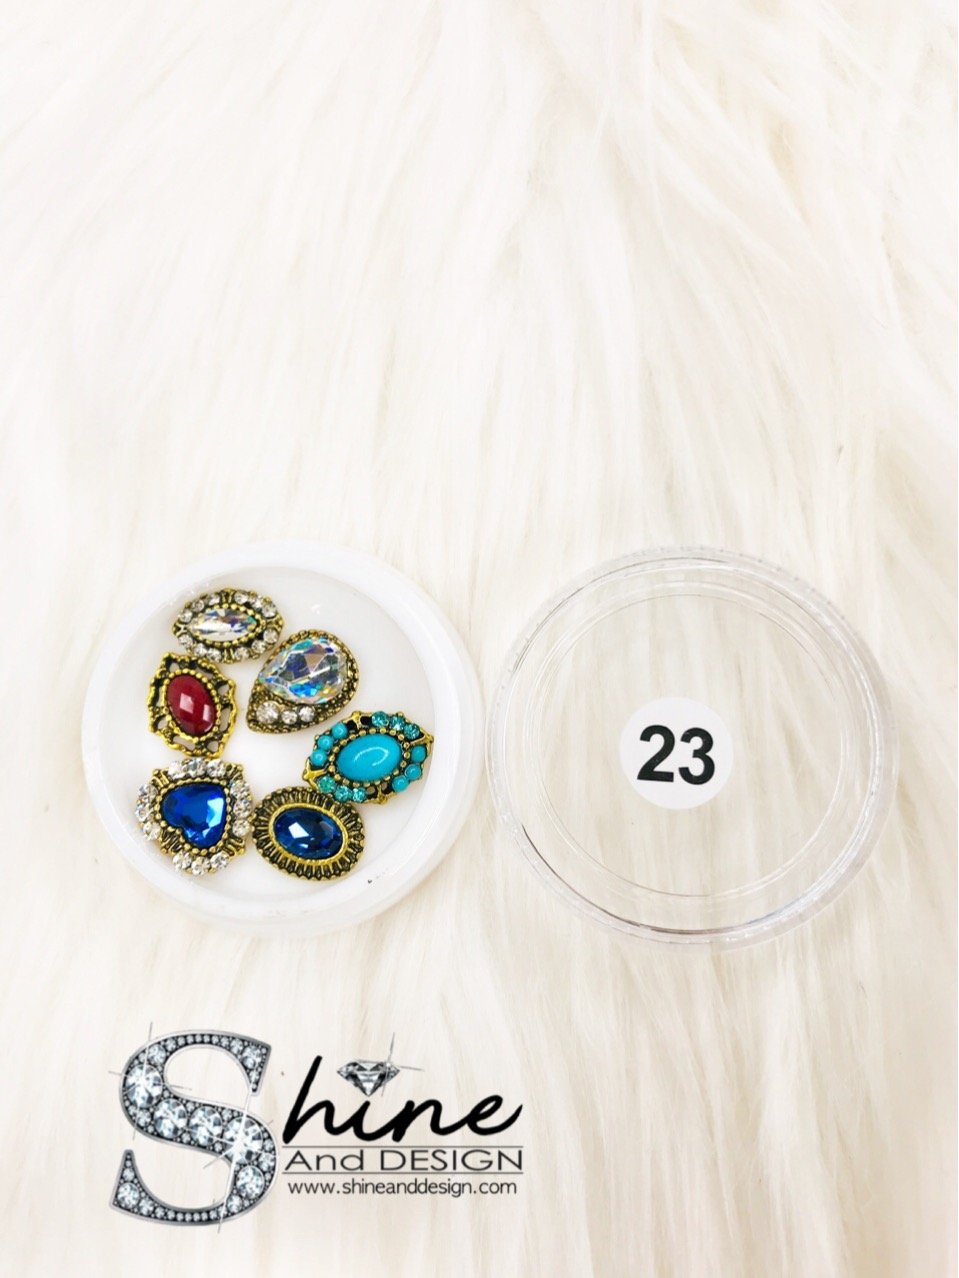 SHINE- Mix Alloy Charms with Crystals - Fancy Collection #23